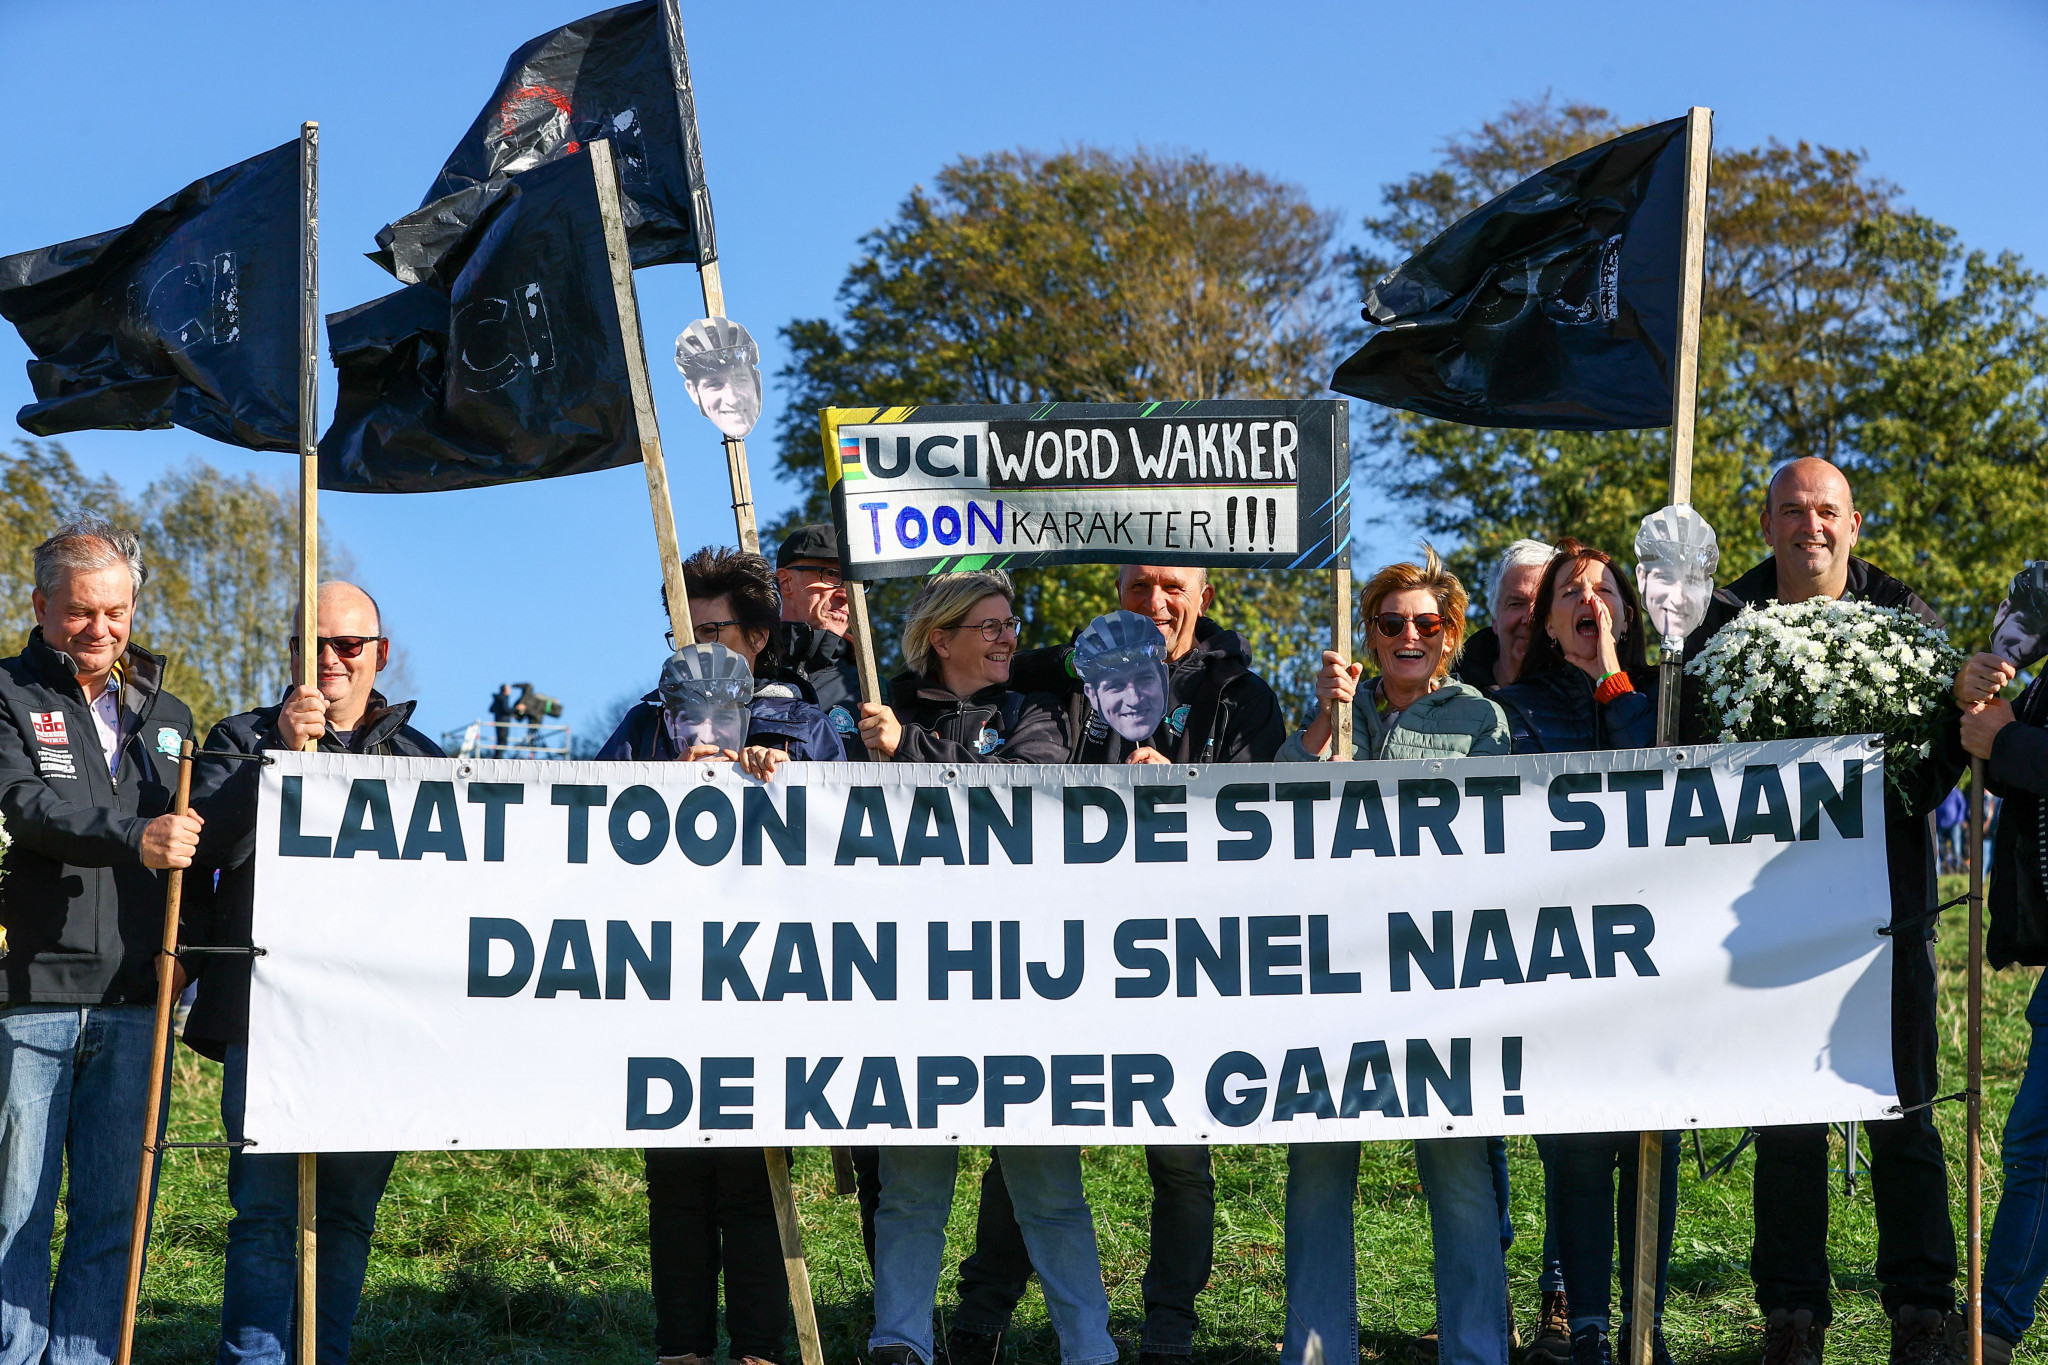 Toon Aerts supporters held a protest on Tuesday in Oudenaarde ©Getty Images